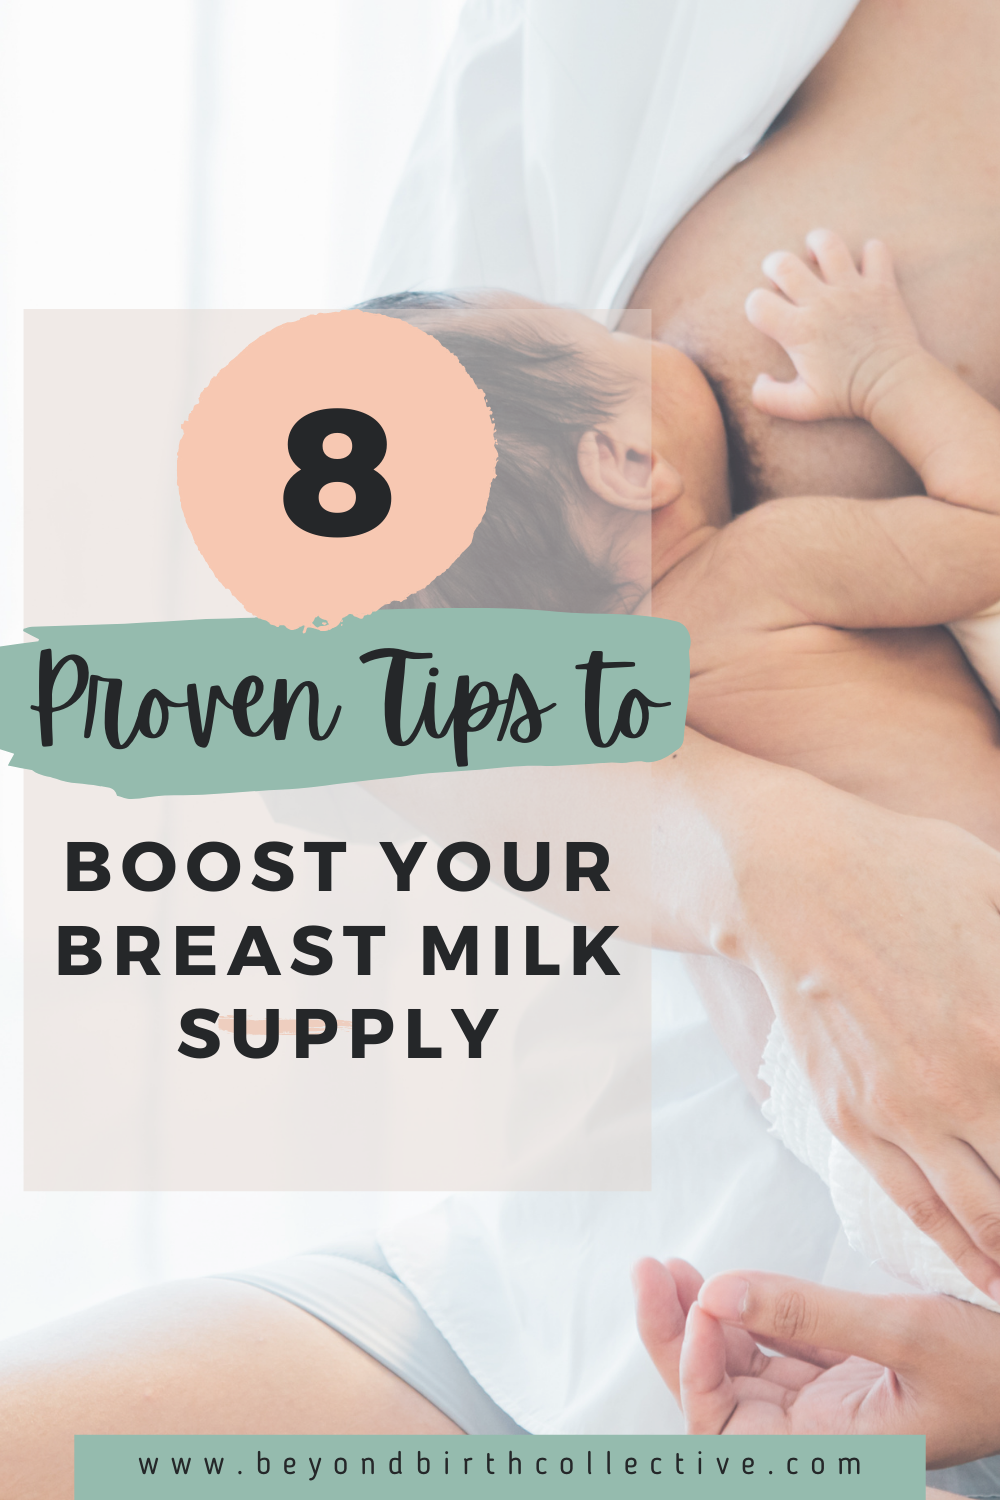 5 Ways Breast Massage Helps Increase Size And Milk